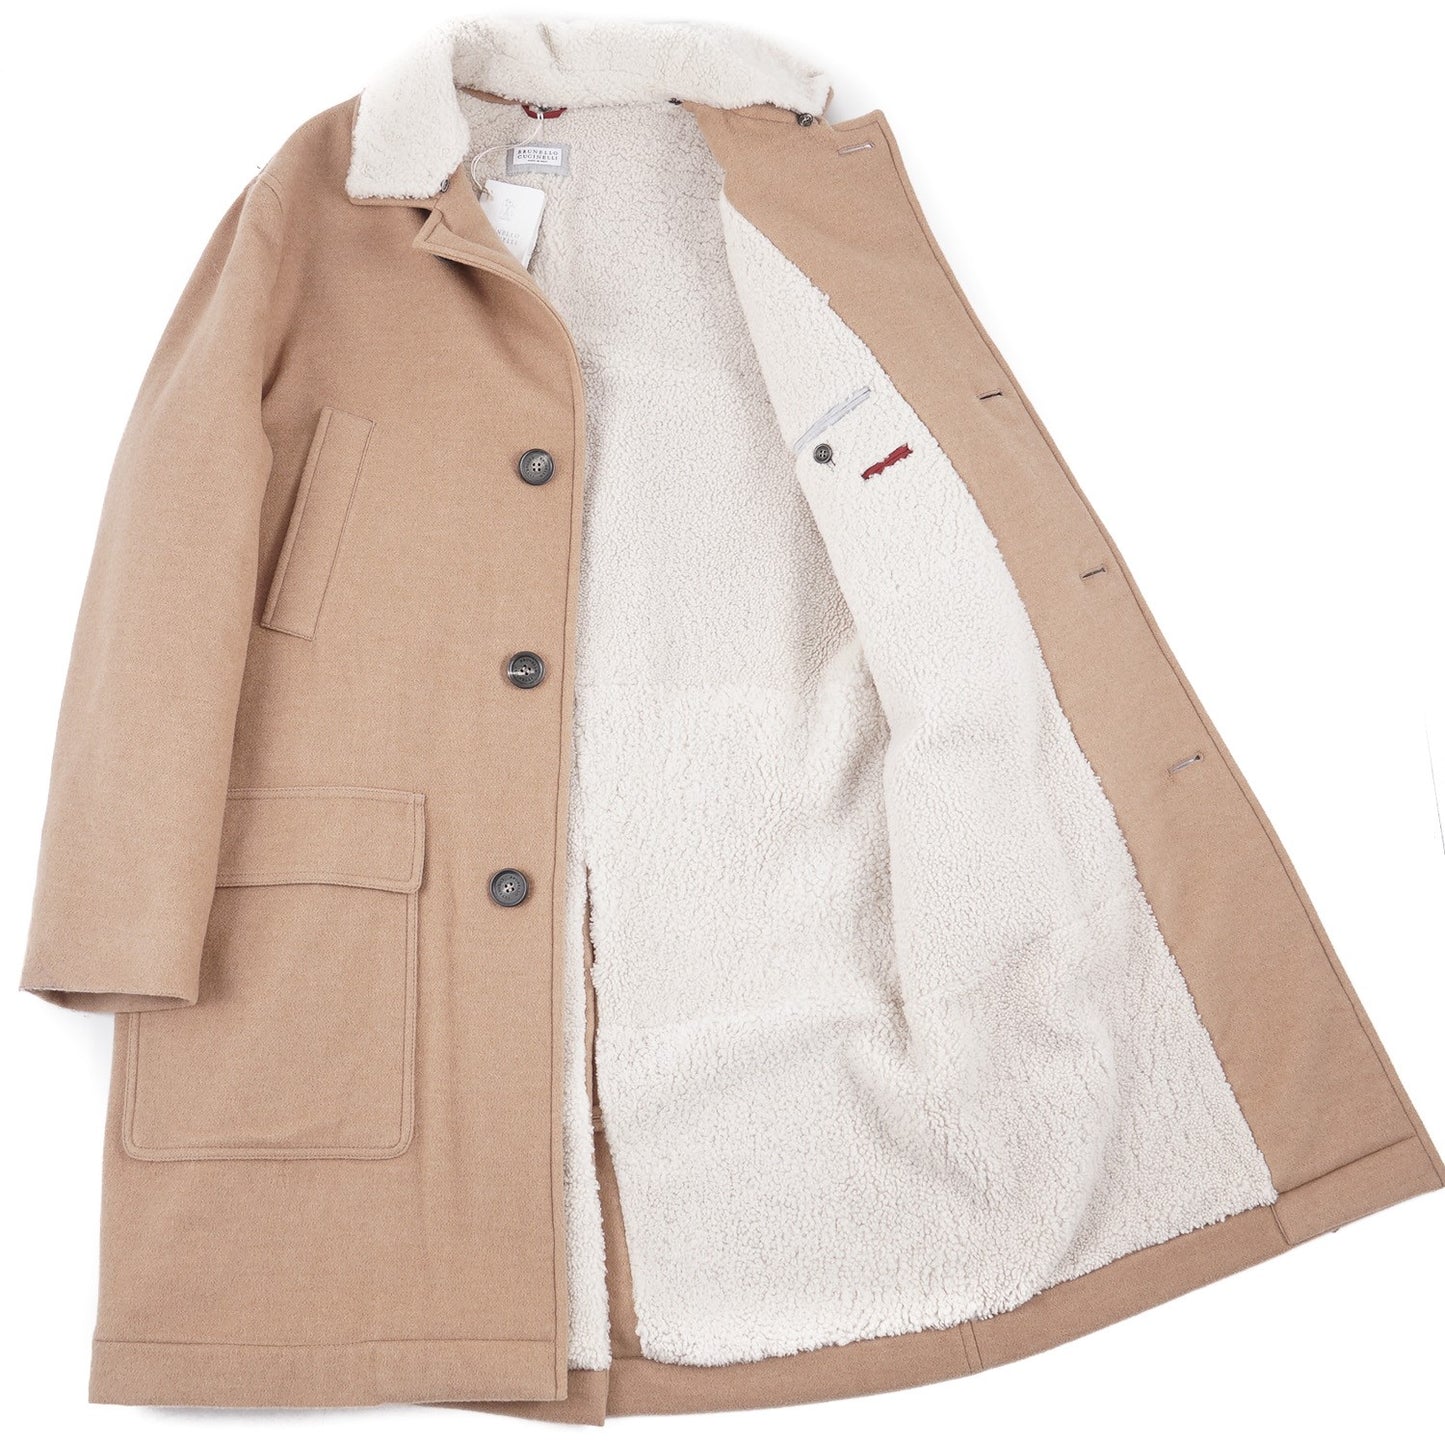 Brunello Cucinelli Cashmere Coat with Shearling Lining - Top Shelf Apparel